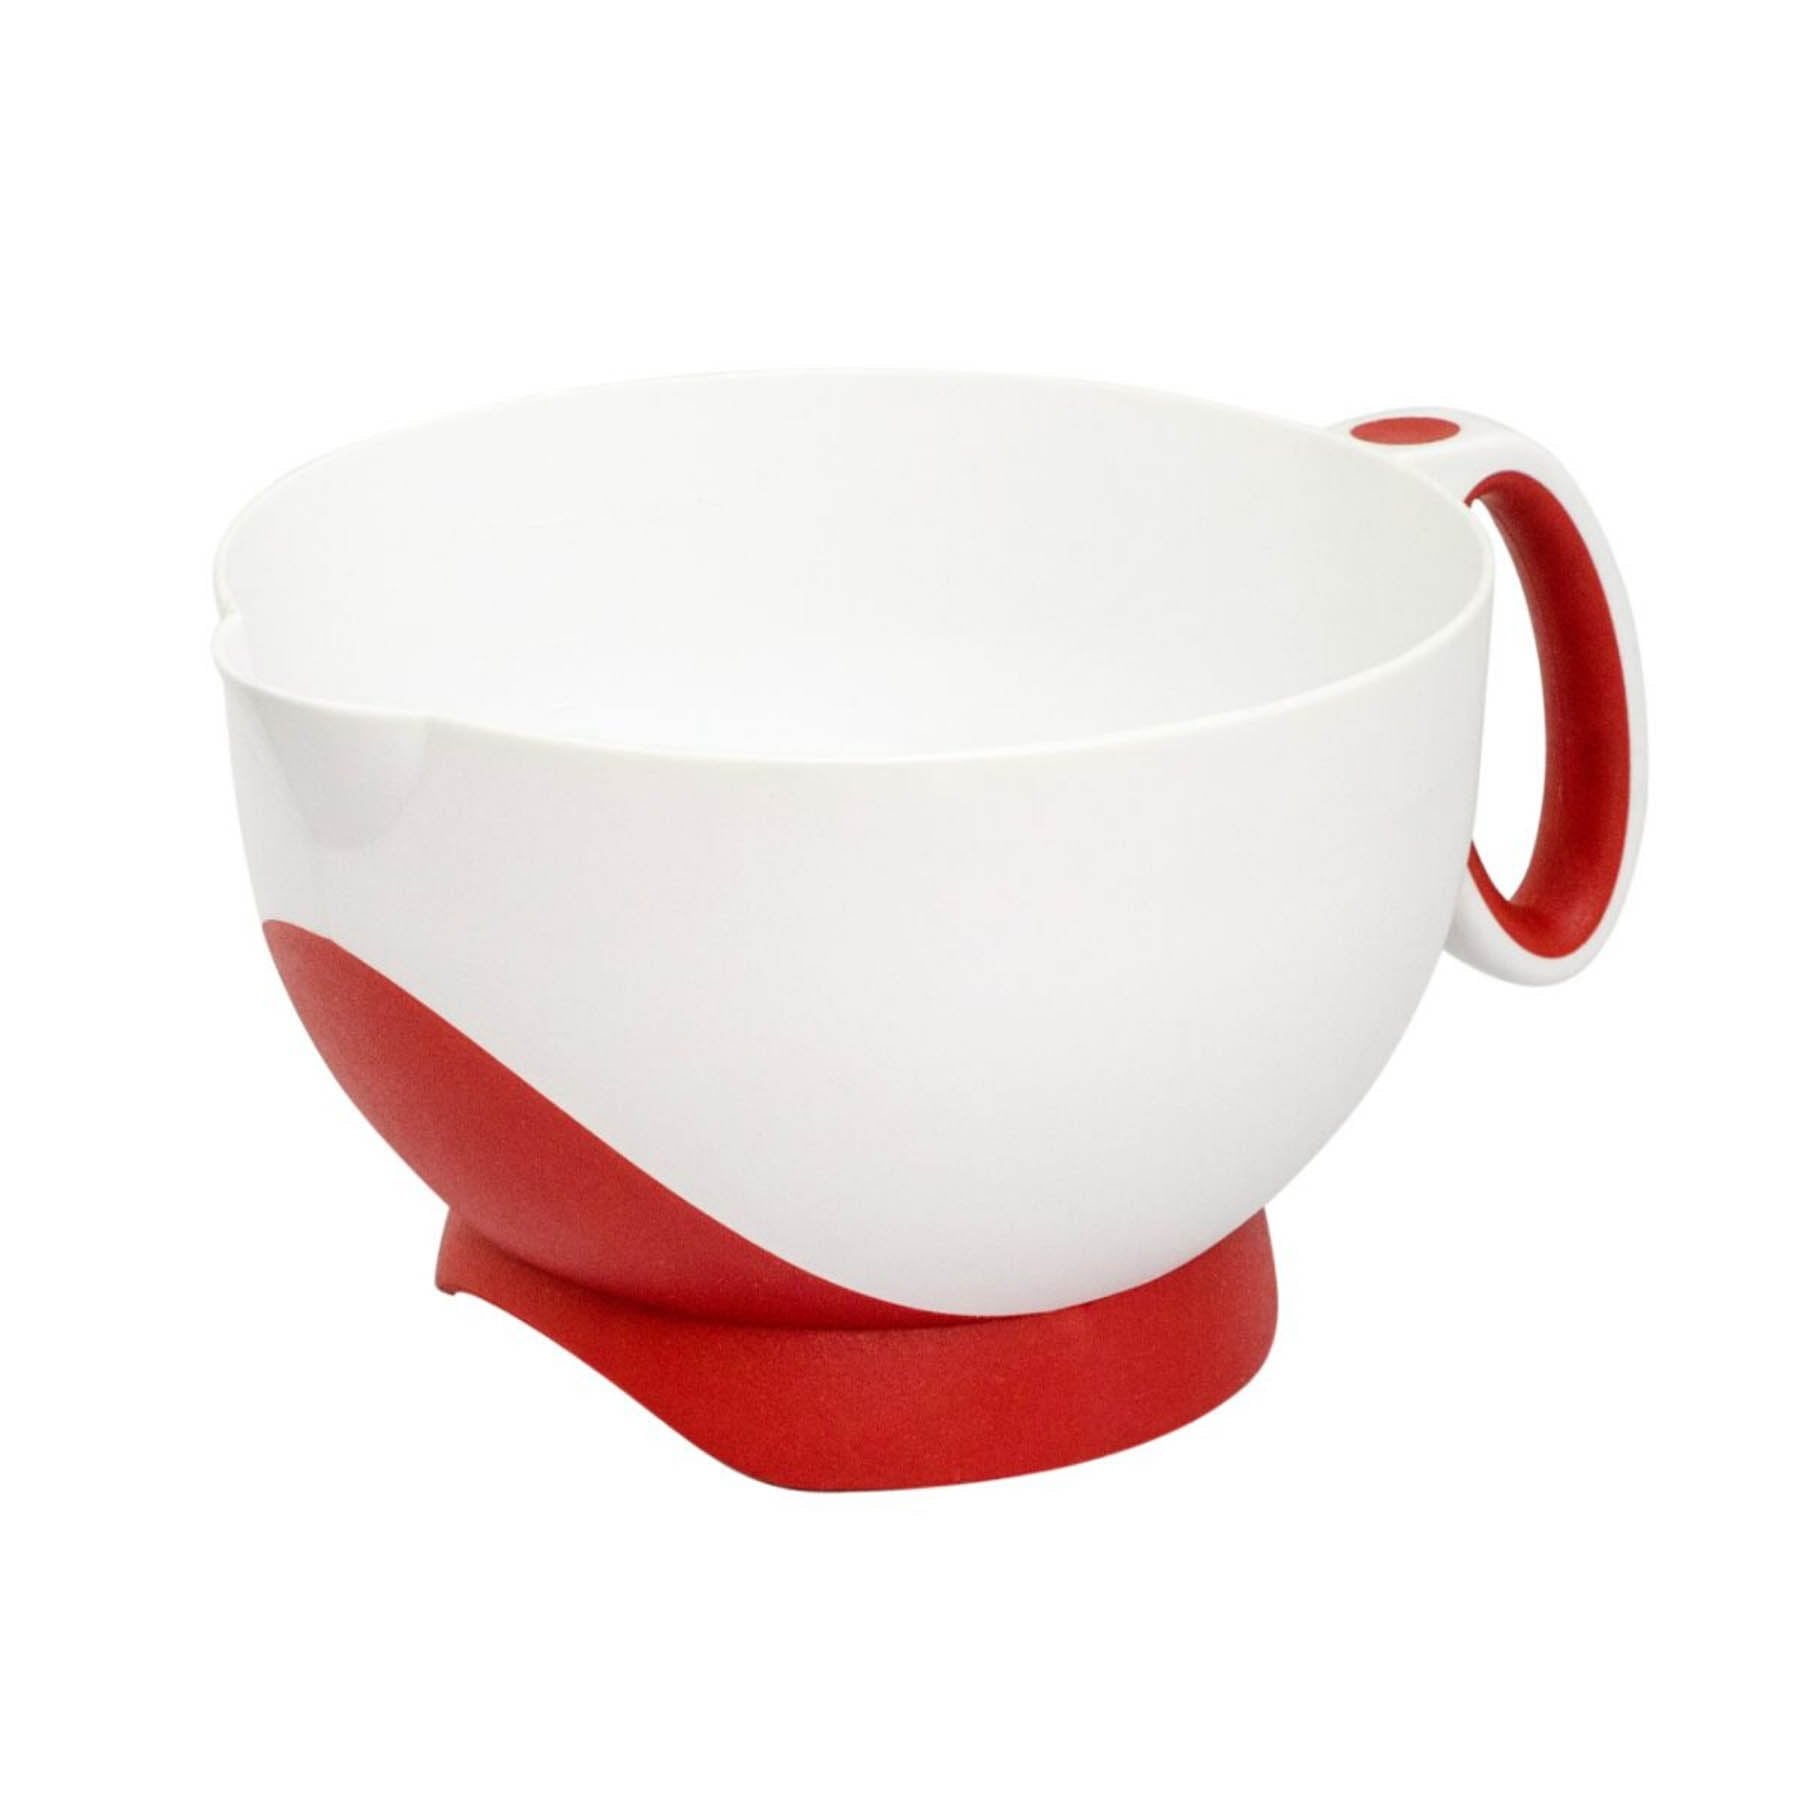 OXO Good Grips 4 QT./4 L. Batter Bowl with Lid